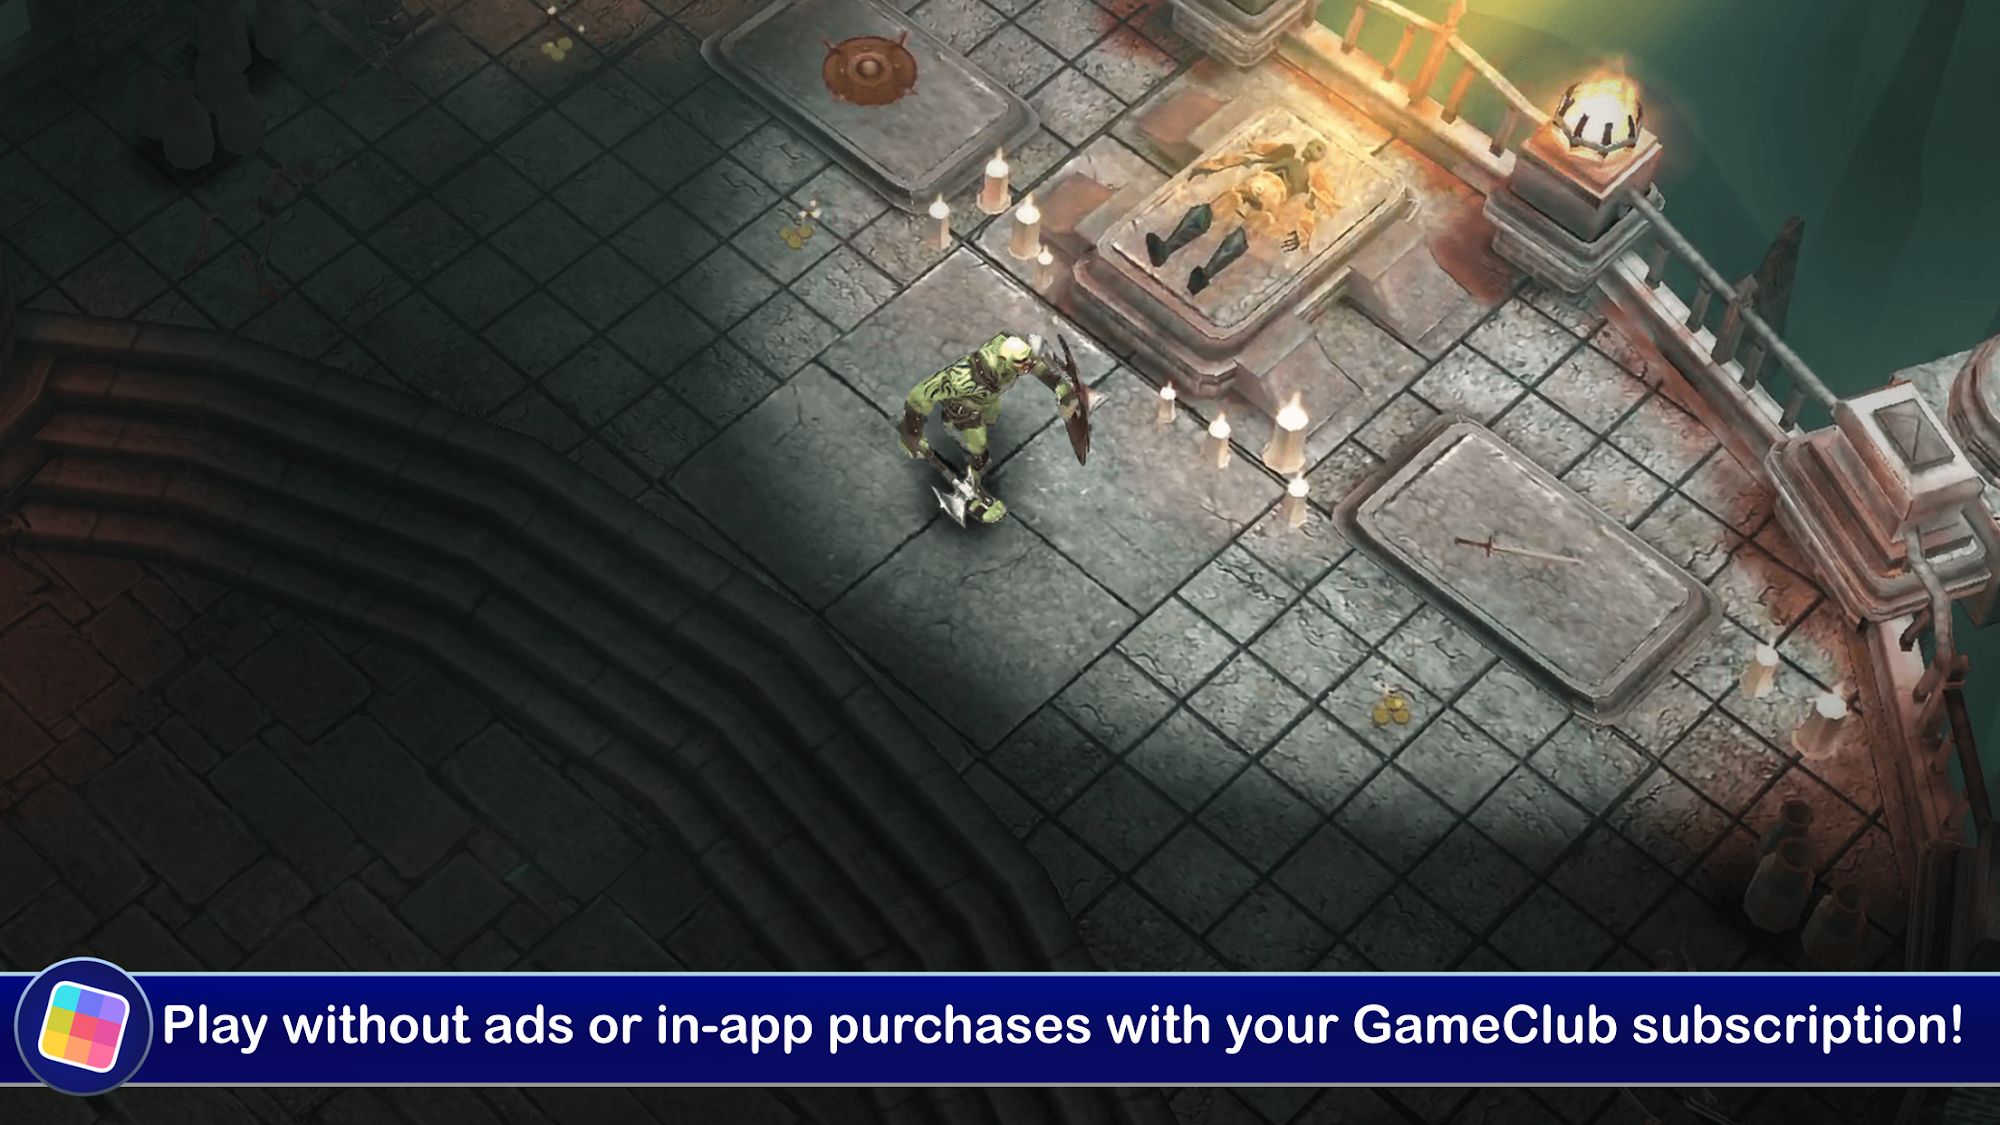 ORC: Vengeance - Wicked Dungeon Crawler Action RPG for Android